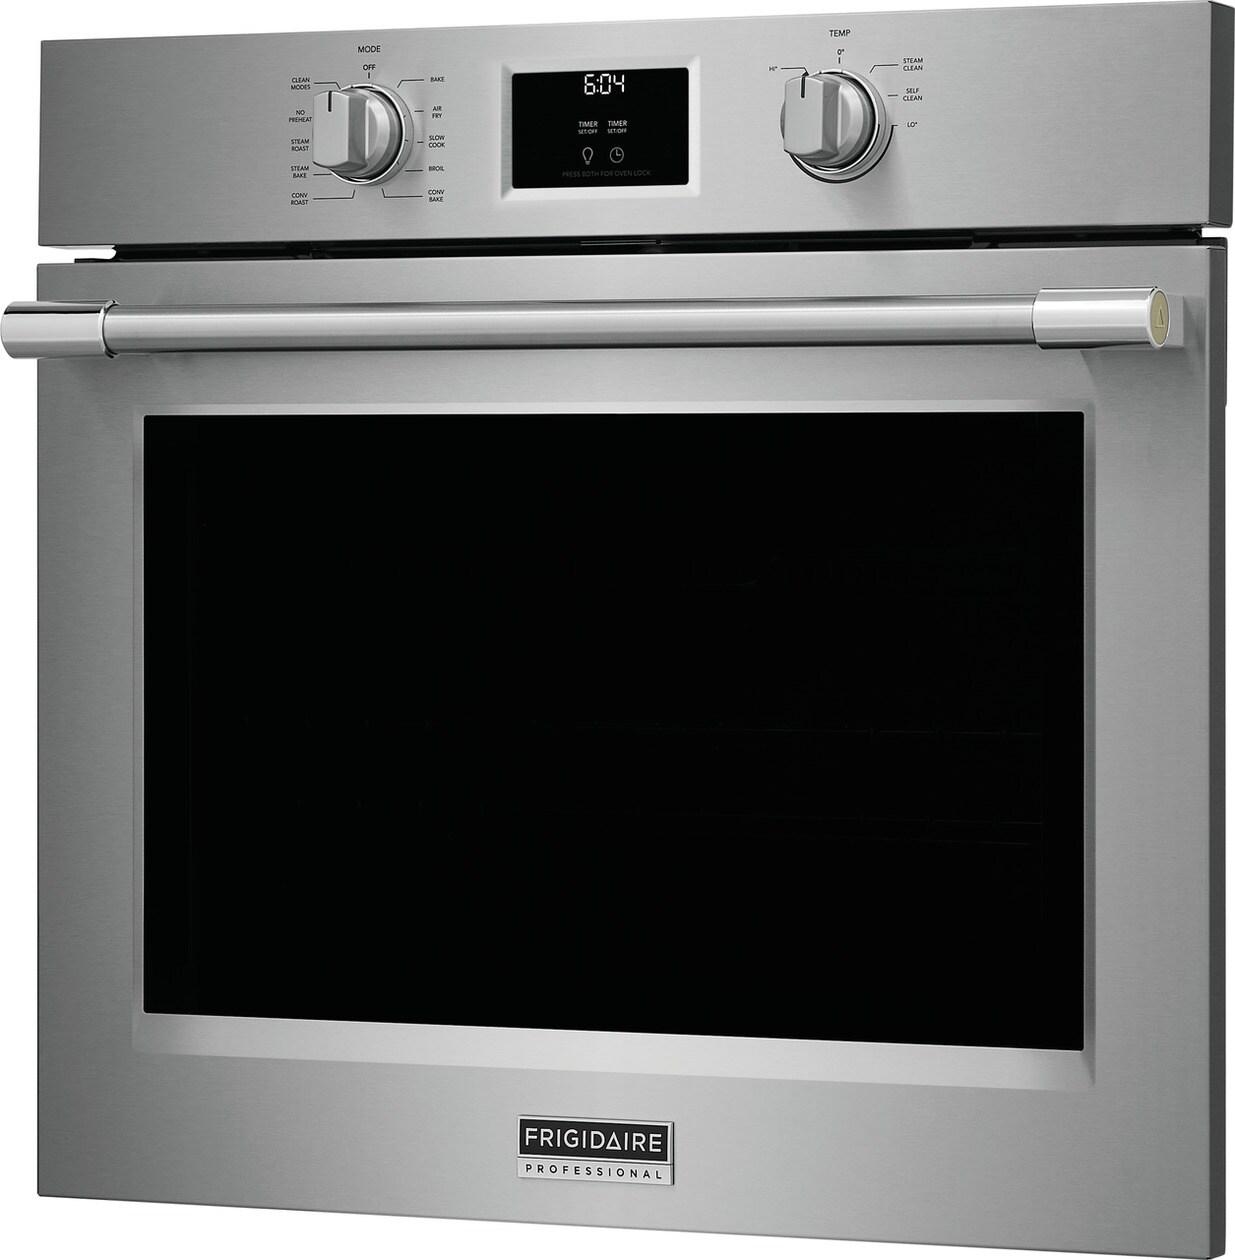 Frigidaire PCWS3080AF Frigidaire Professional 30" Single Wall Oven With Total Convection